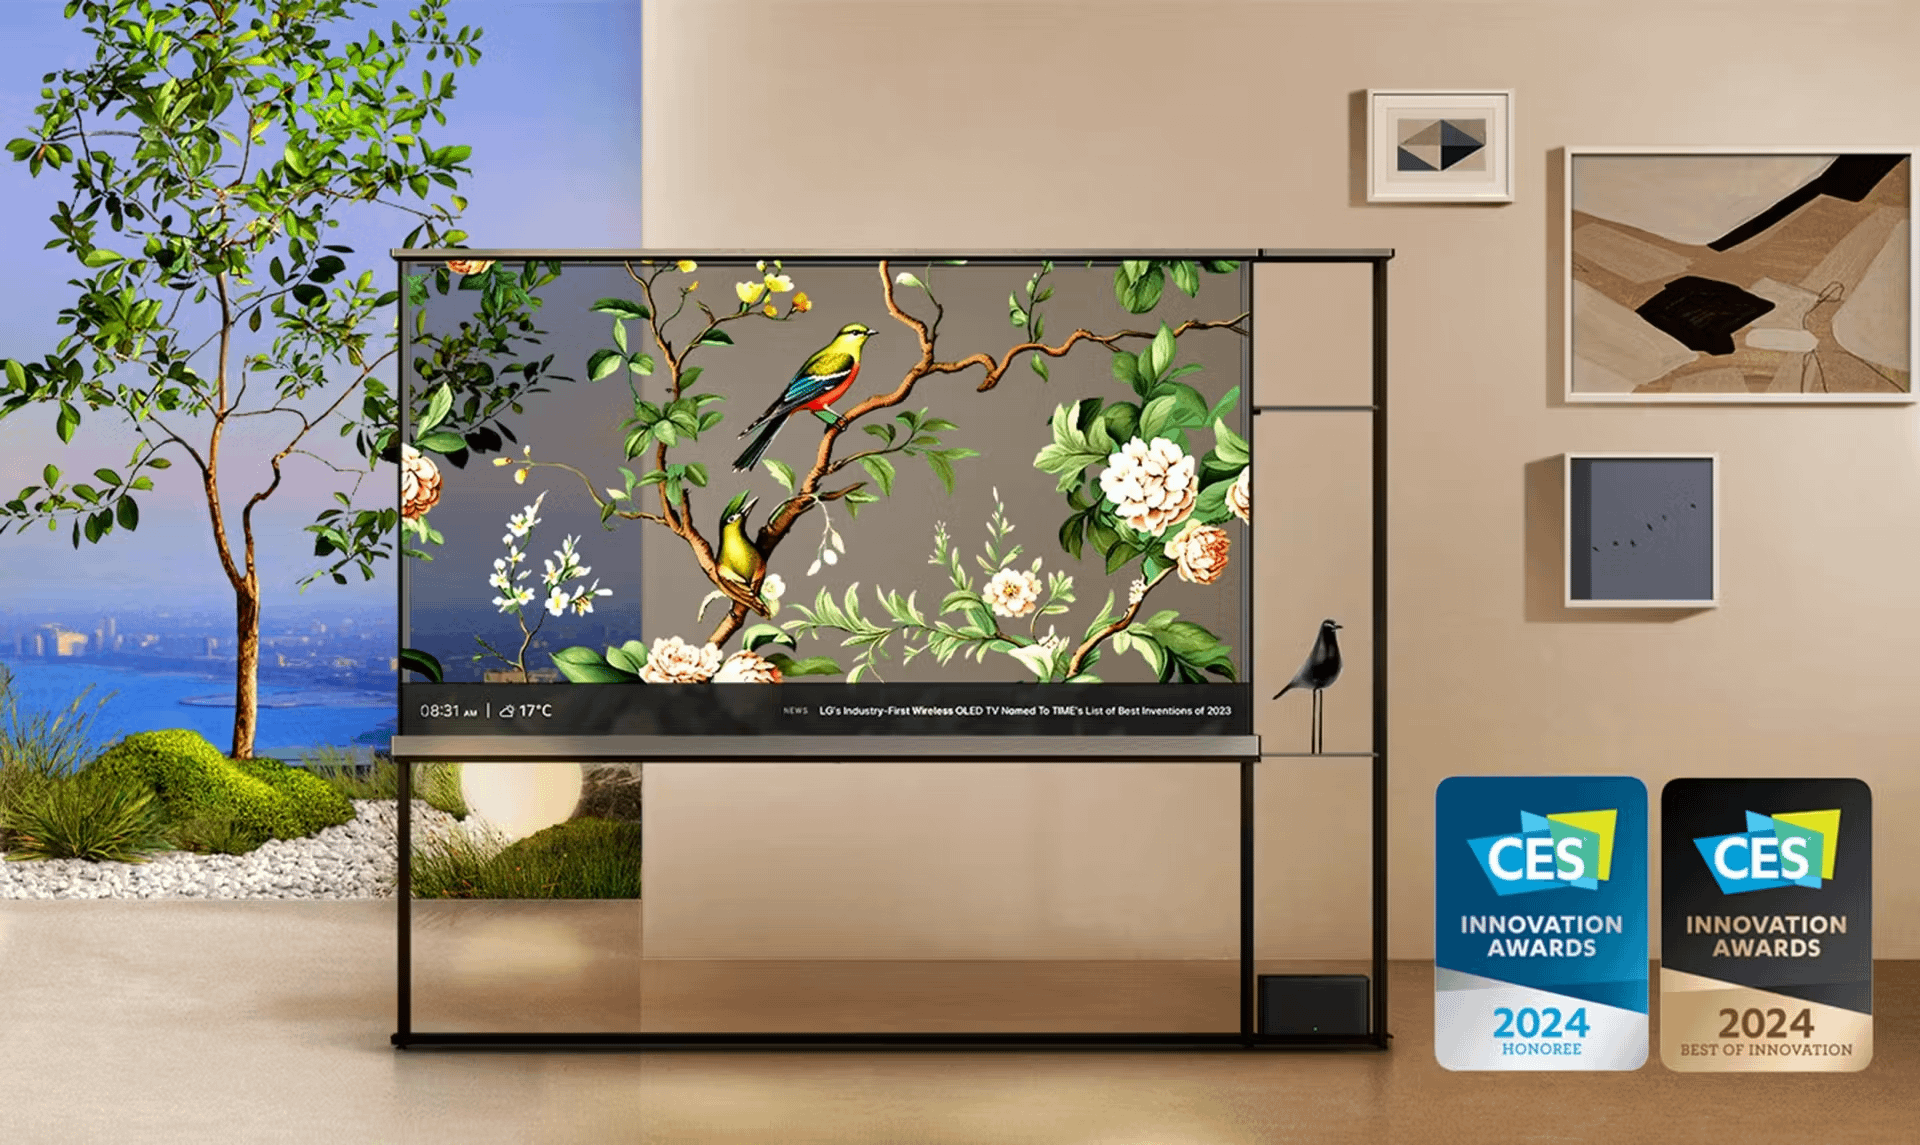 OLED TV: Introduction and Market News